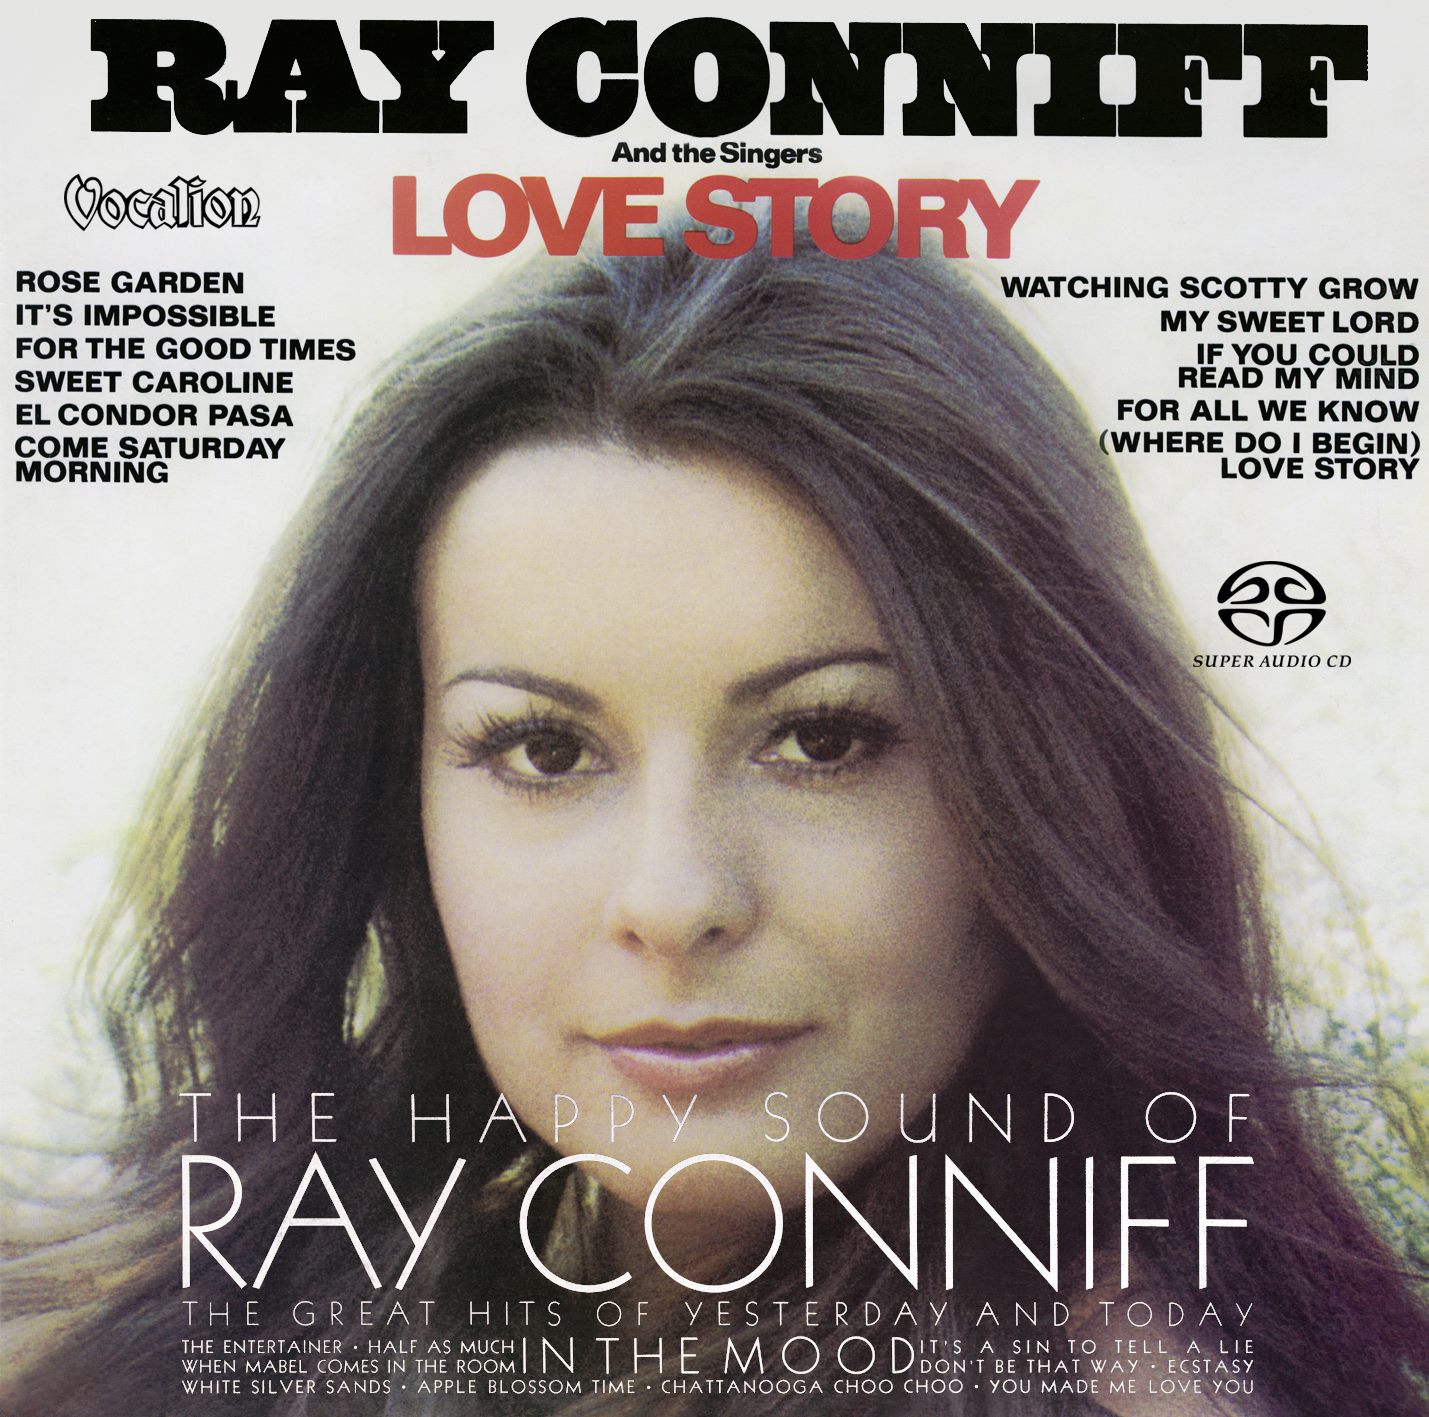 Ray Conniff – The Happy Sound Of & Love Story (1974 & 1971) [Reissue 2019] MCH SACD ISO + Hi-Res FLAC